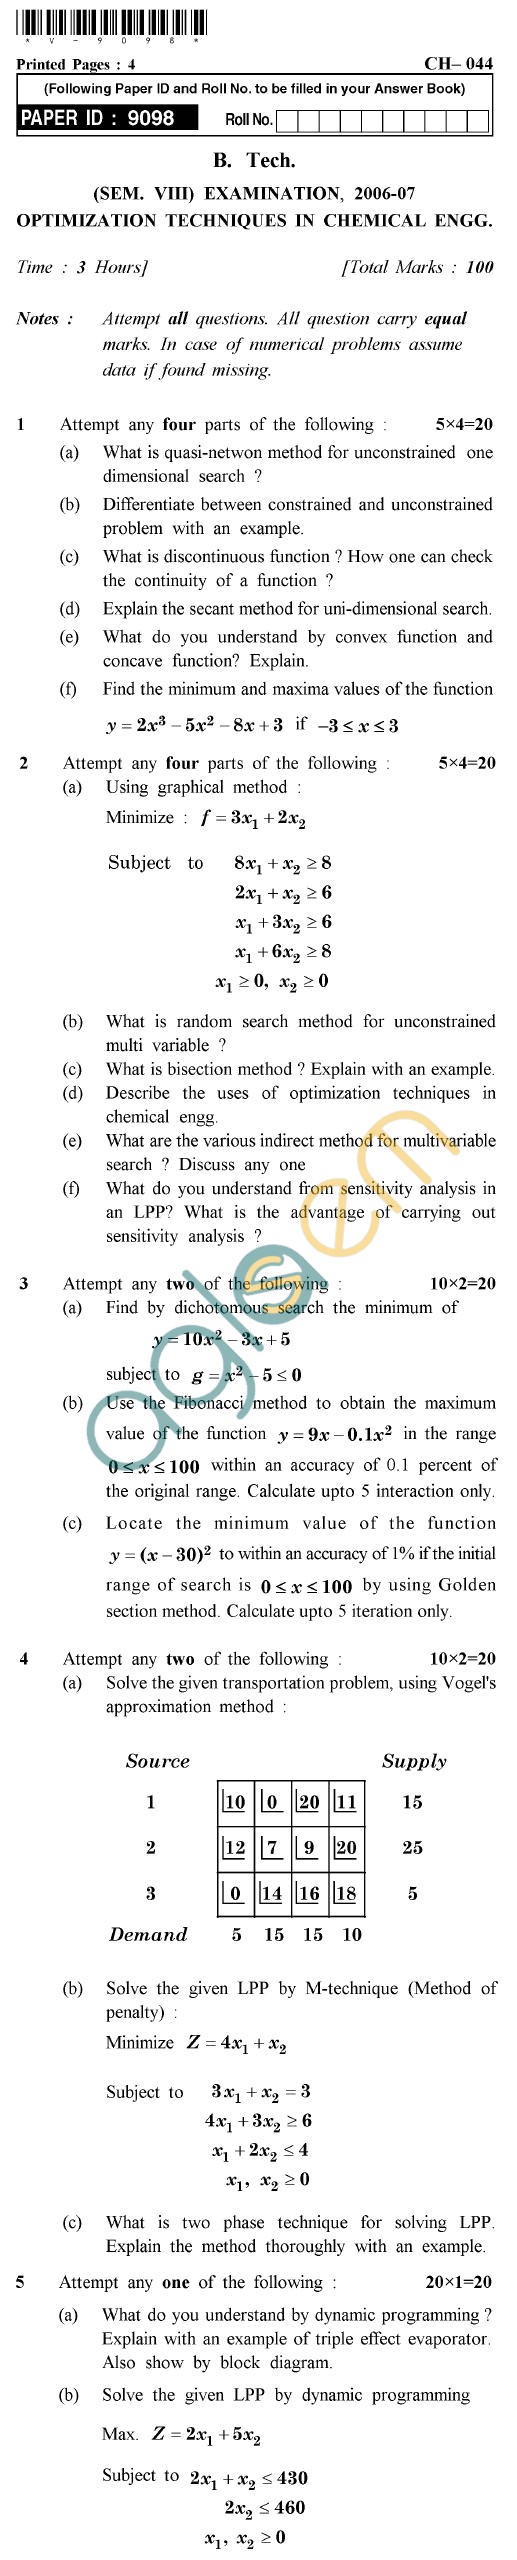 UPTU B.Tech Question Papers - CH-044 - Optimization Techniques in Chemical Engineering